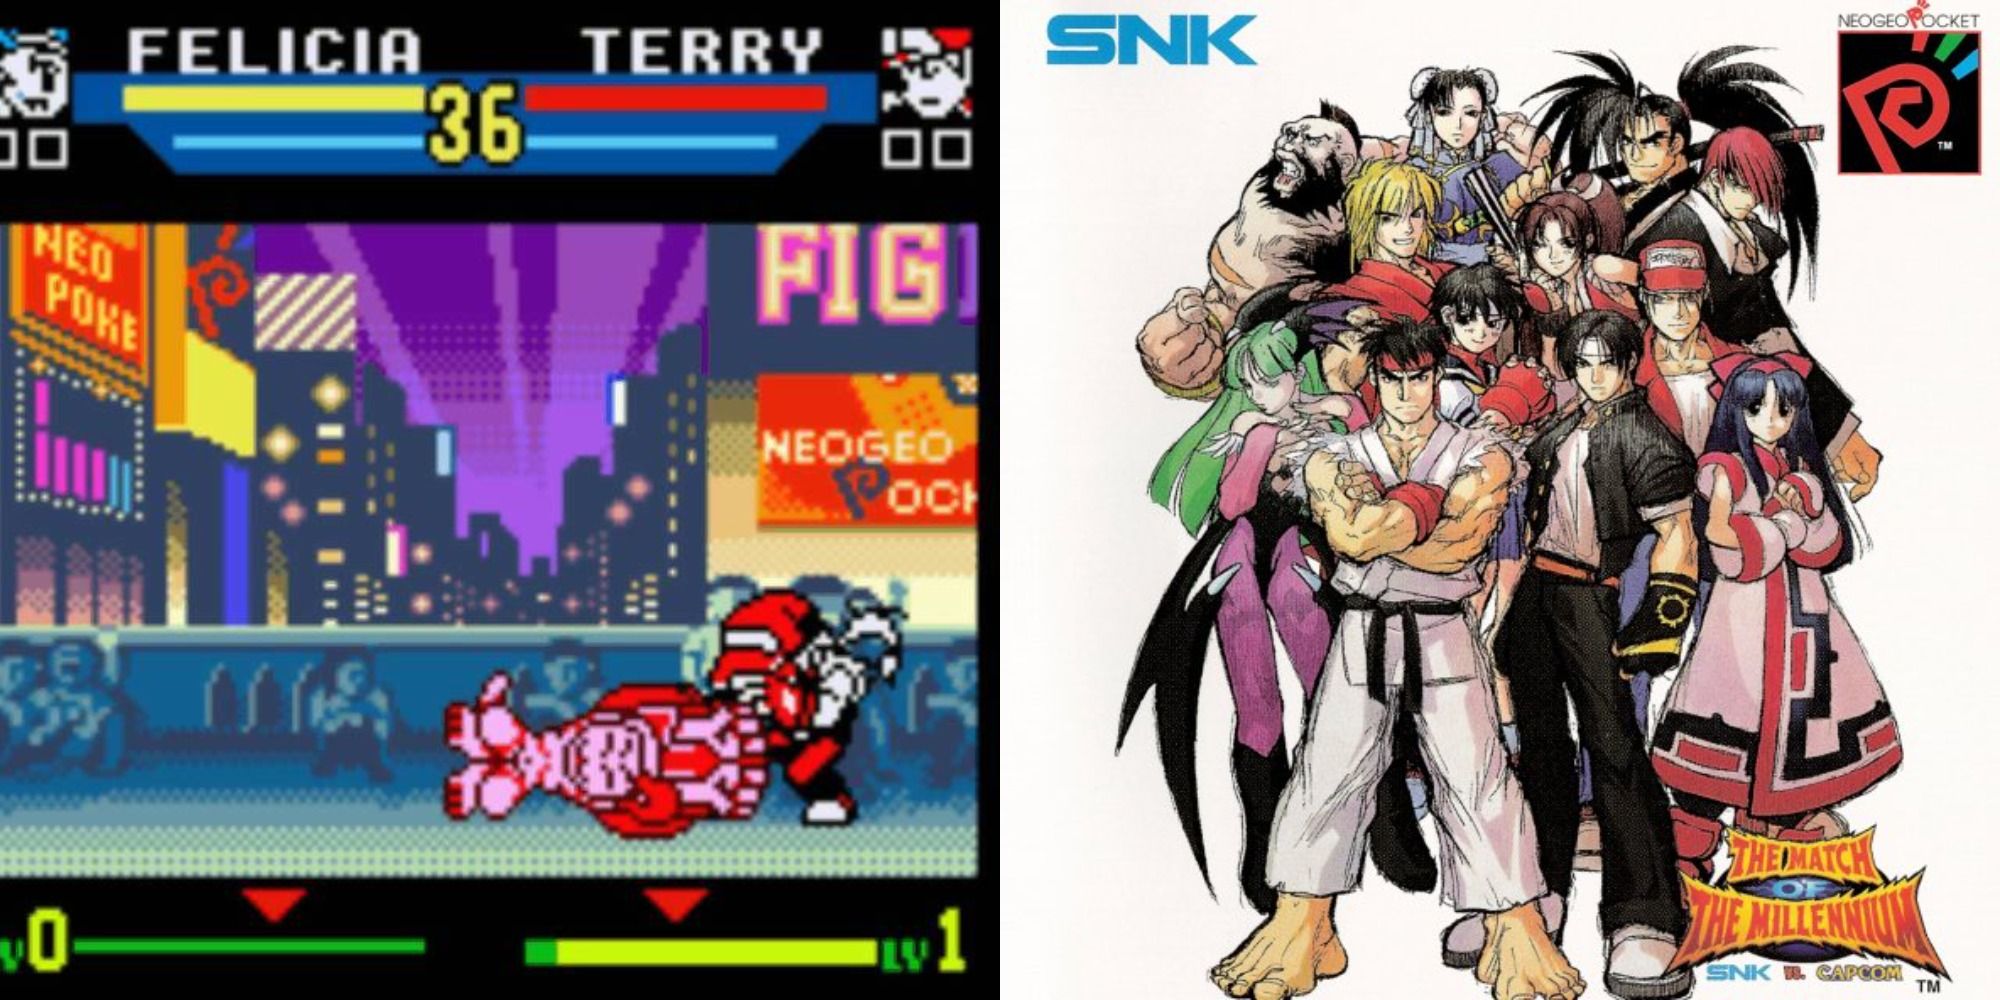 Two side by side images of the characters and gameplay from Snk vs Capcom Match of the Millennium